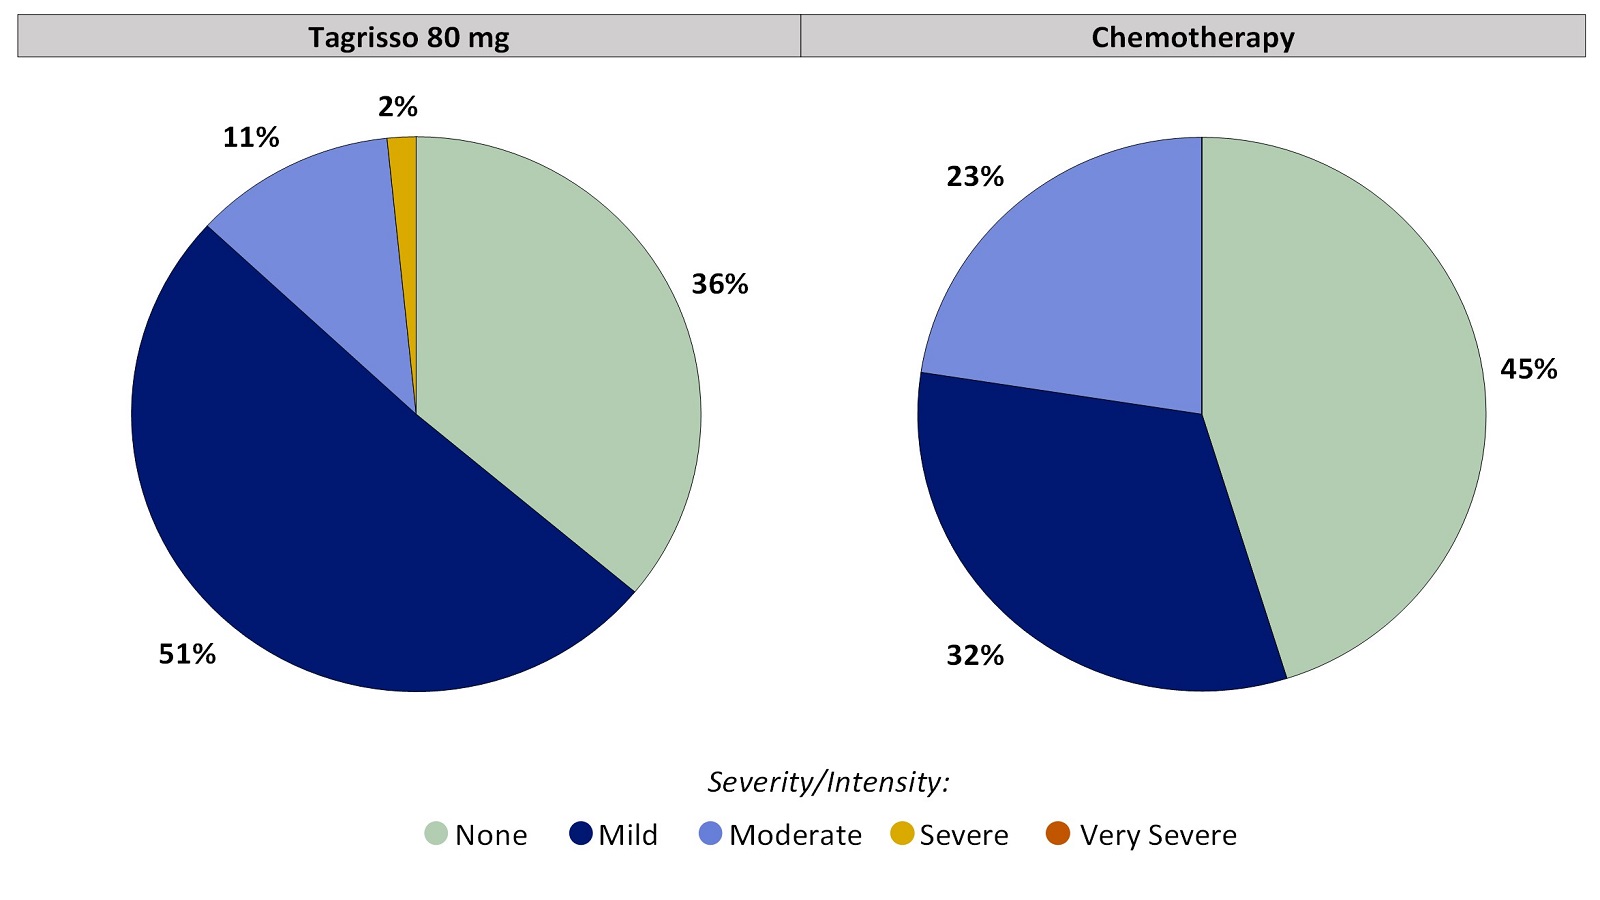 Two pie charts, one for Tagrisso and the other for chemotherapy, which includes only those patients who had no numbness or tingling in hands or feet before treatment. The pie charts summarize the percentage of patients by worst reported numbness or tingling in hands or feet. In the Tagrisso arm, None (36%), Mild (51%), Moderate (11%), Severe (2%), Very Severe (0%). In the chemotherapy arm, None (45%), Mild (32%), Moderate (23%), Severe (0%), and Very severe (0%).